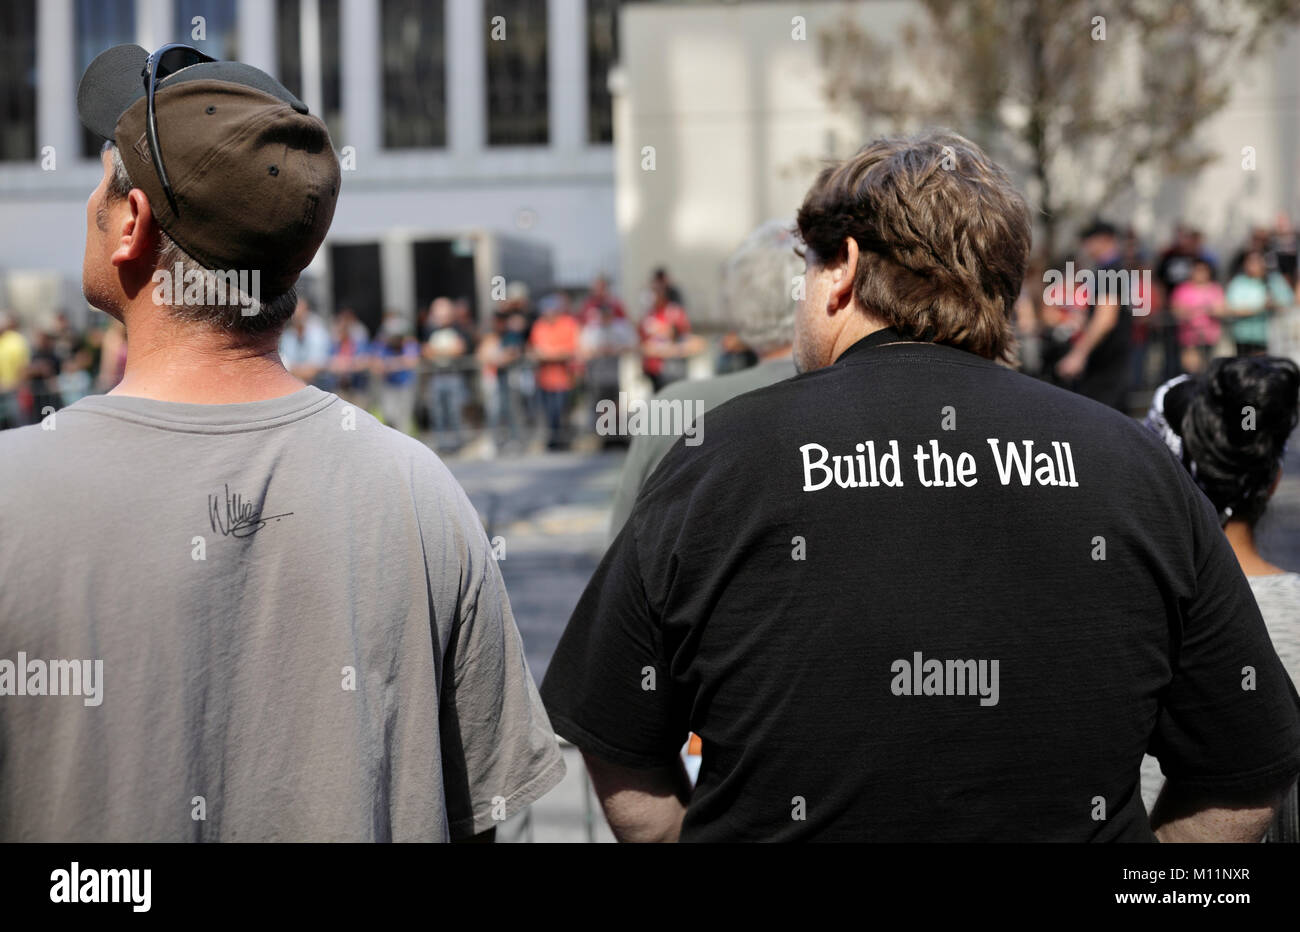 A man wearing 'Build The Wall' t-shirt at a public event in downtown Raleigh, North Carolina, USA Stock Photo